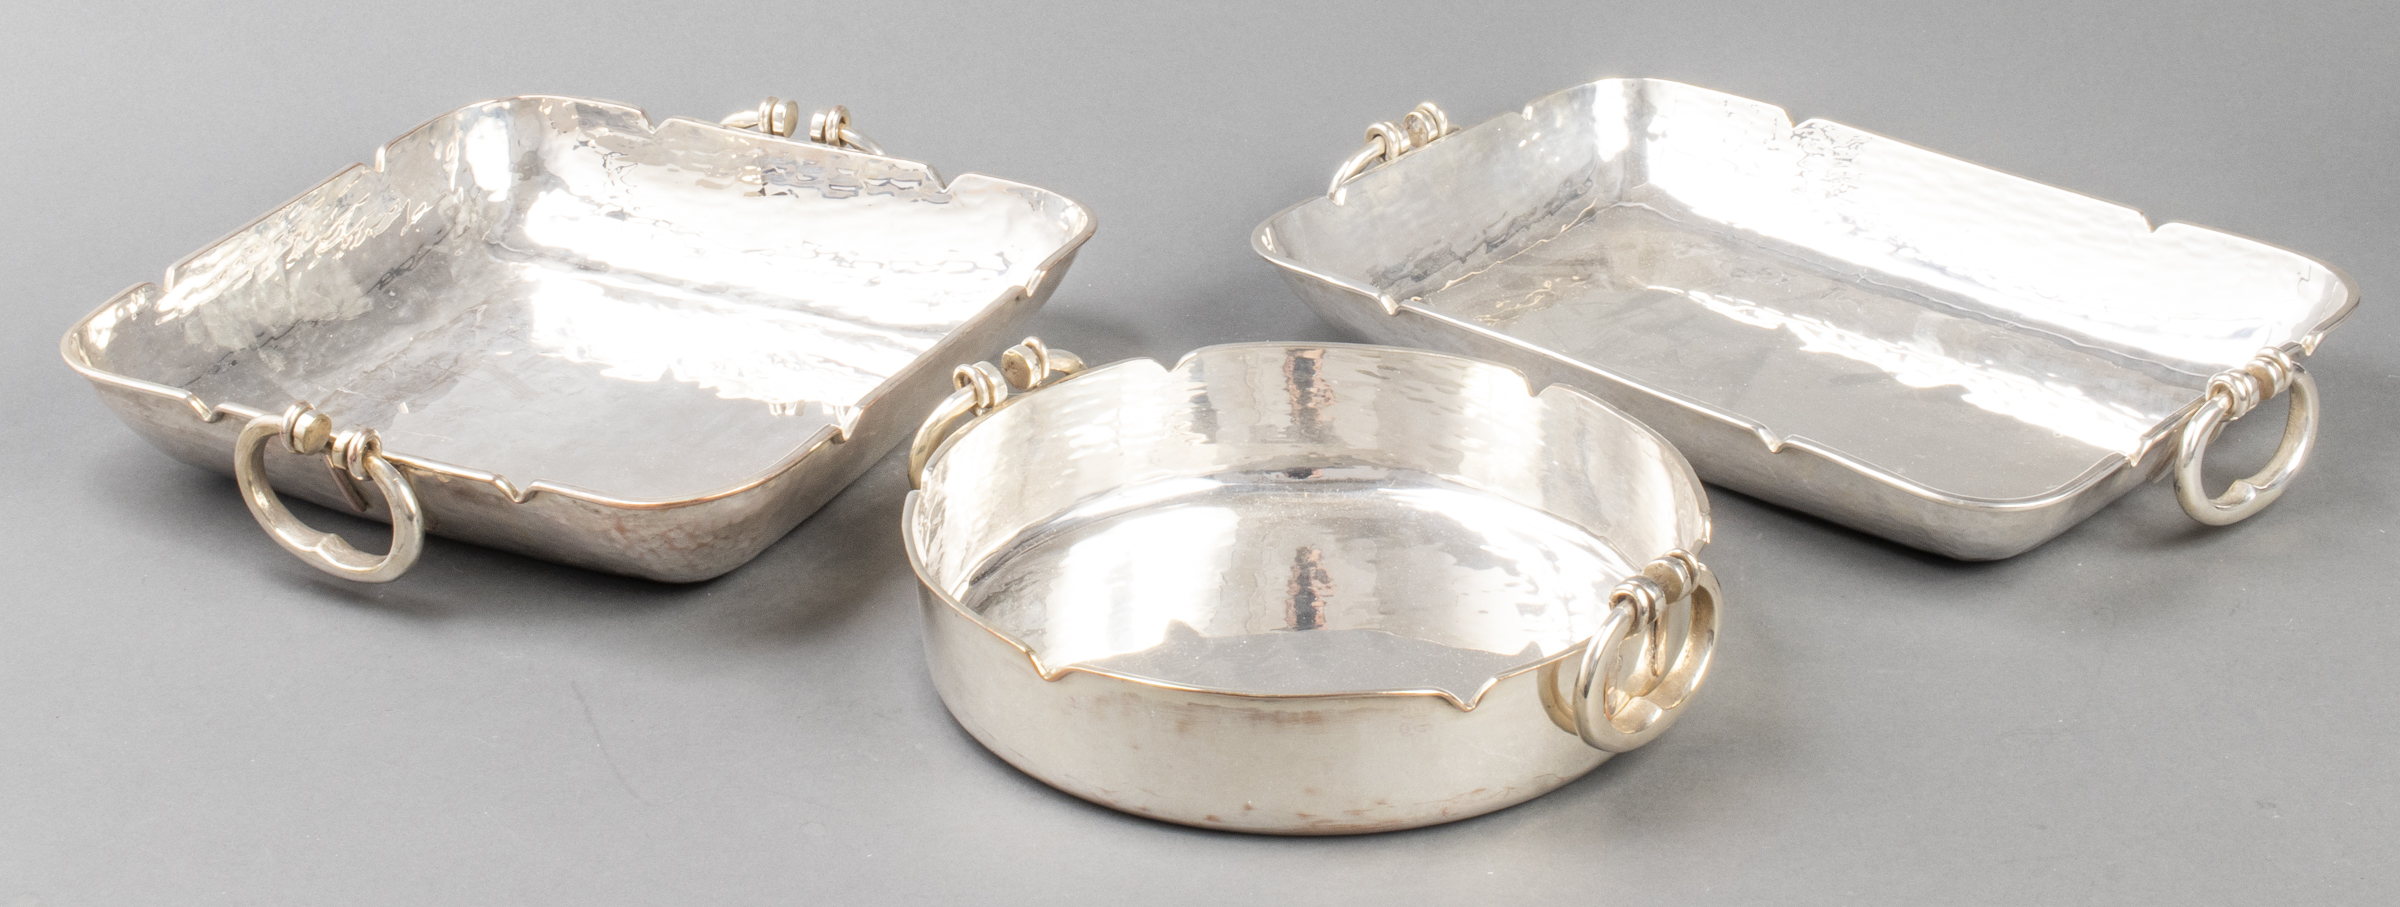 SILVERPLATE SERVING DISHES WITH